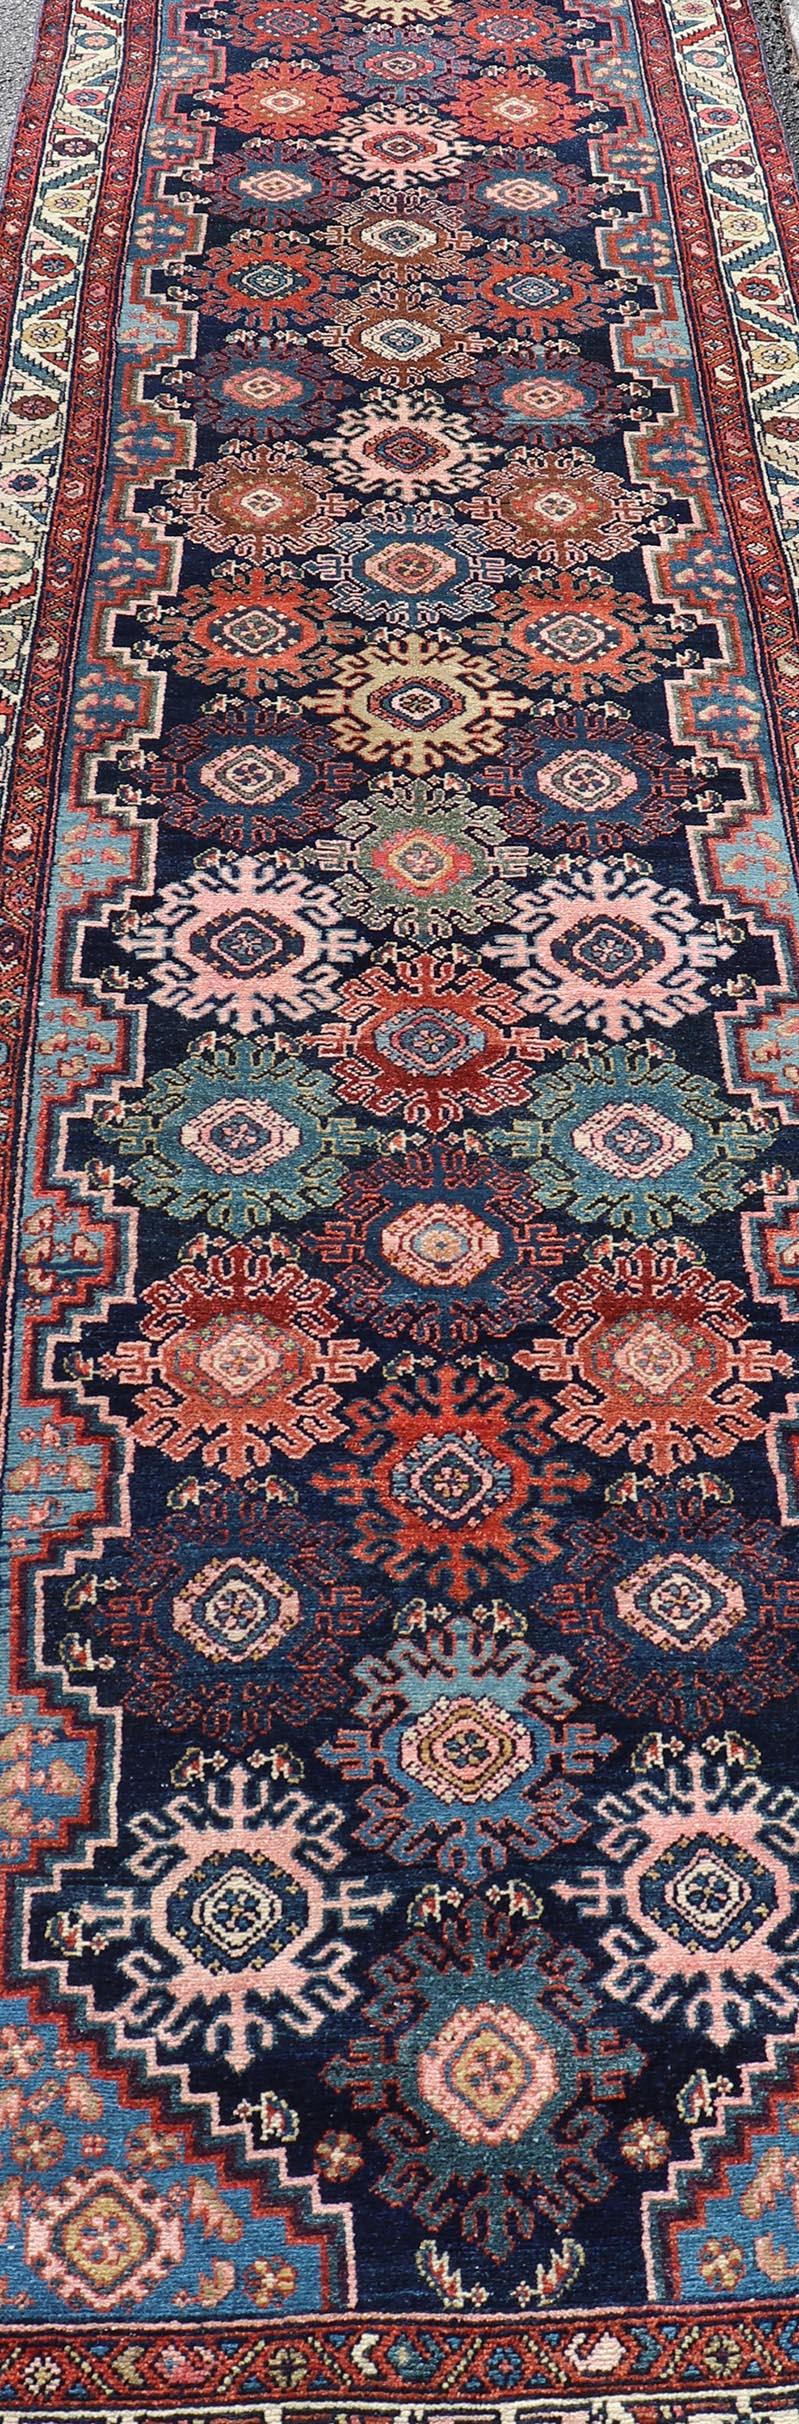 Antique Persian Hamadan Runner with All-Over Geometric Motifs In Jewel Tones For Sale 6